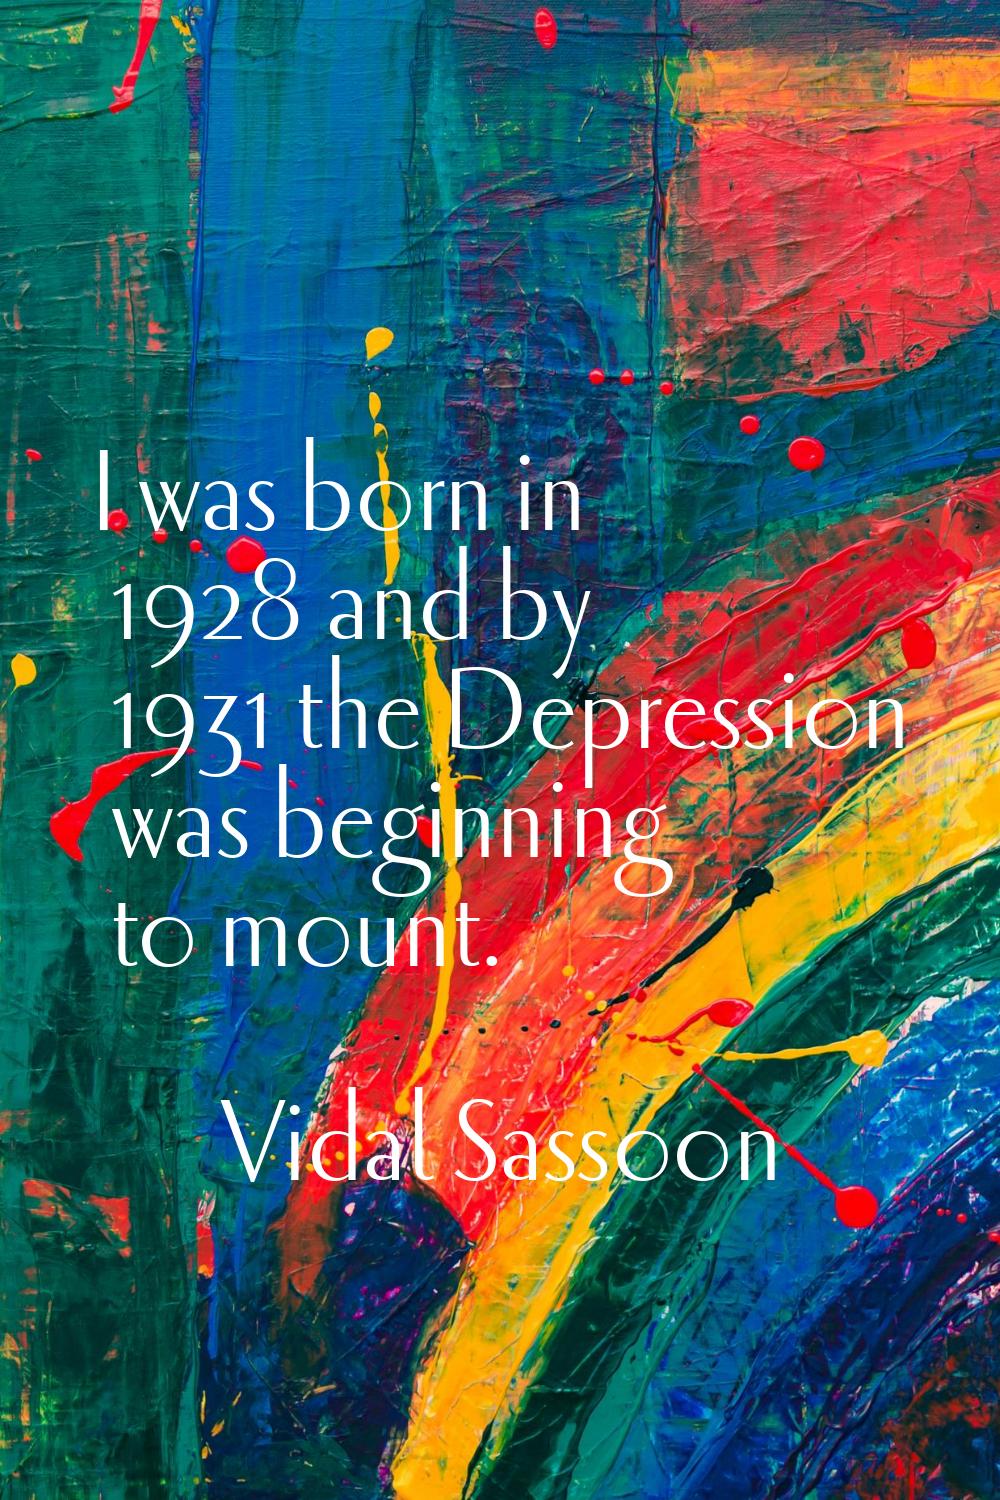 I was born in 1928 and by 1931 the Depression was beginning to mount.